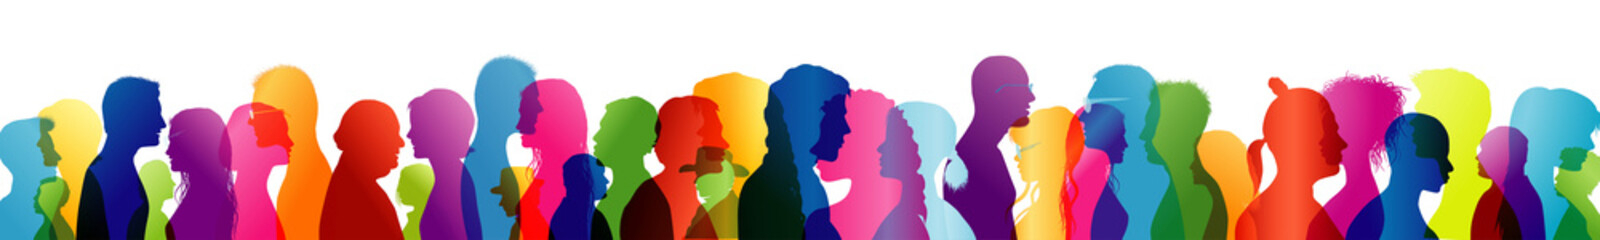 Group of people talking. Crowd talking. To communicate. Speak. Colored silhouette profiles